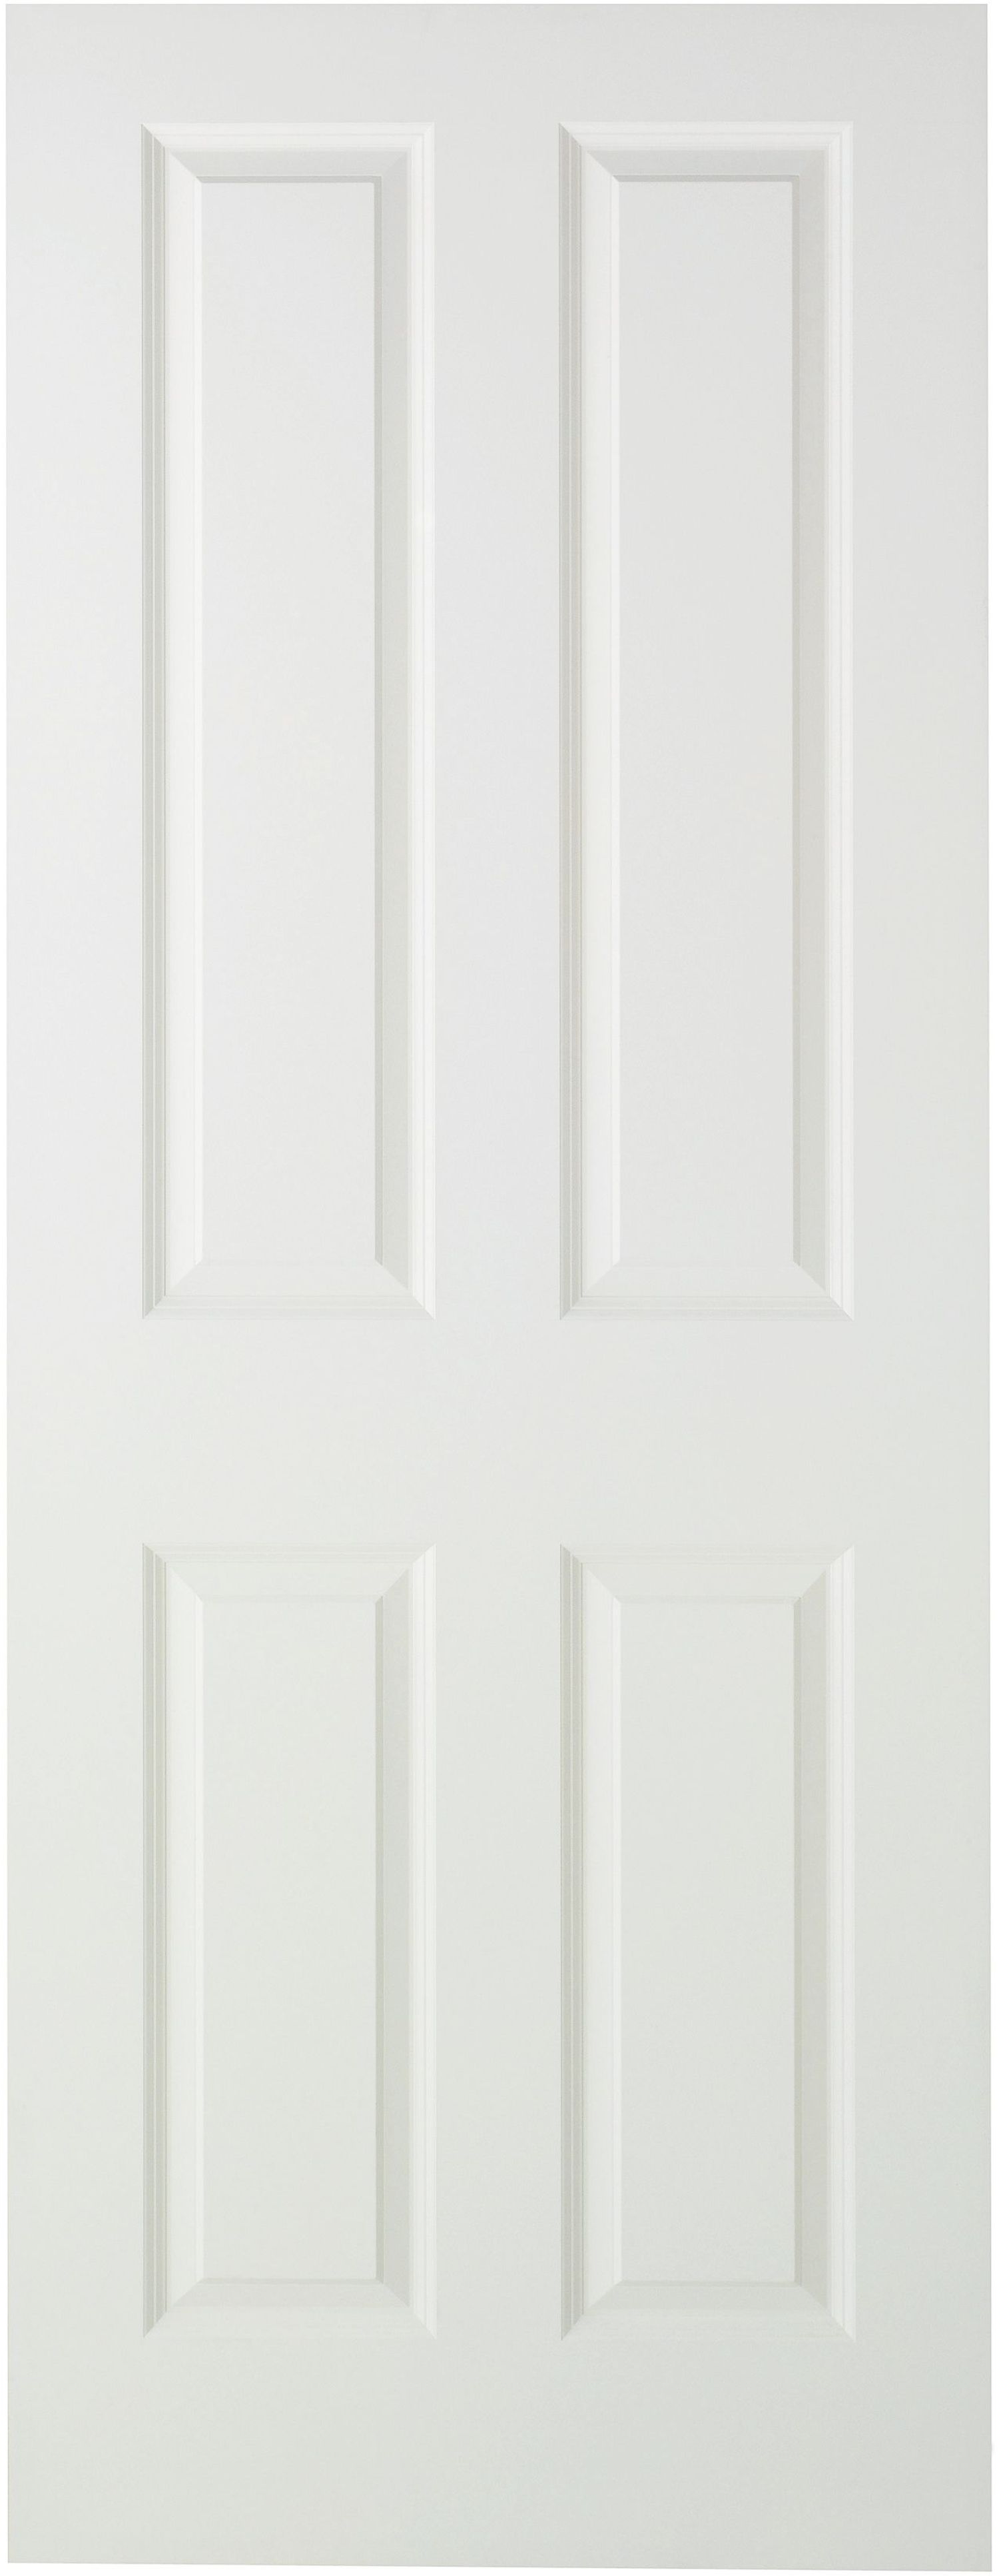 Image of Wickes Chester White Smooth Moulded 4 Panel FD30 Internal Fire Door - 1981 x 838mm